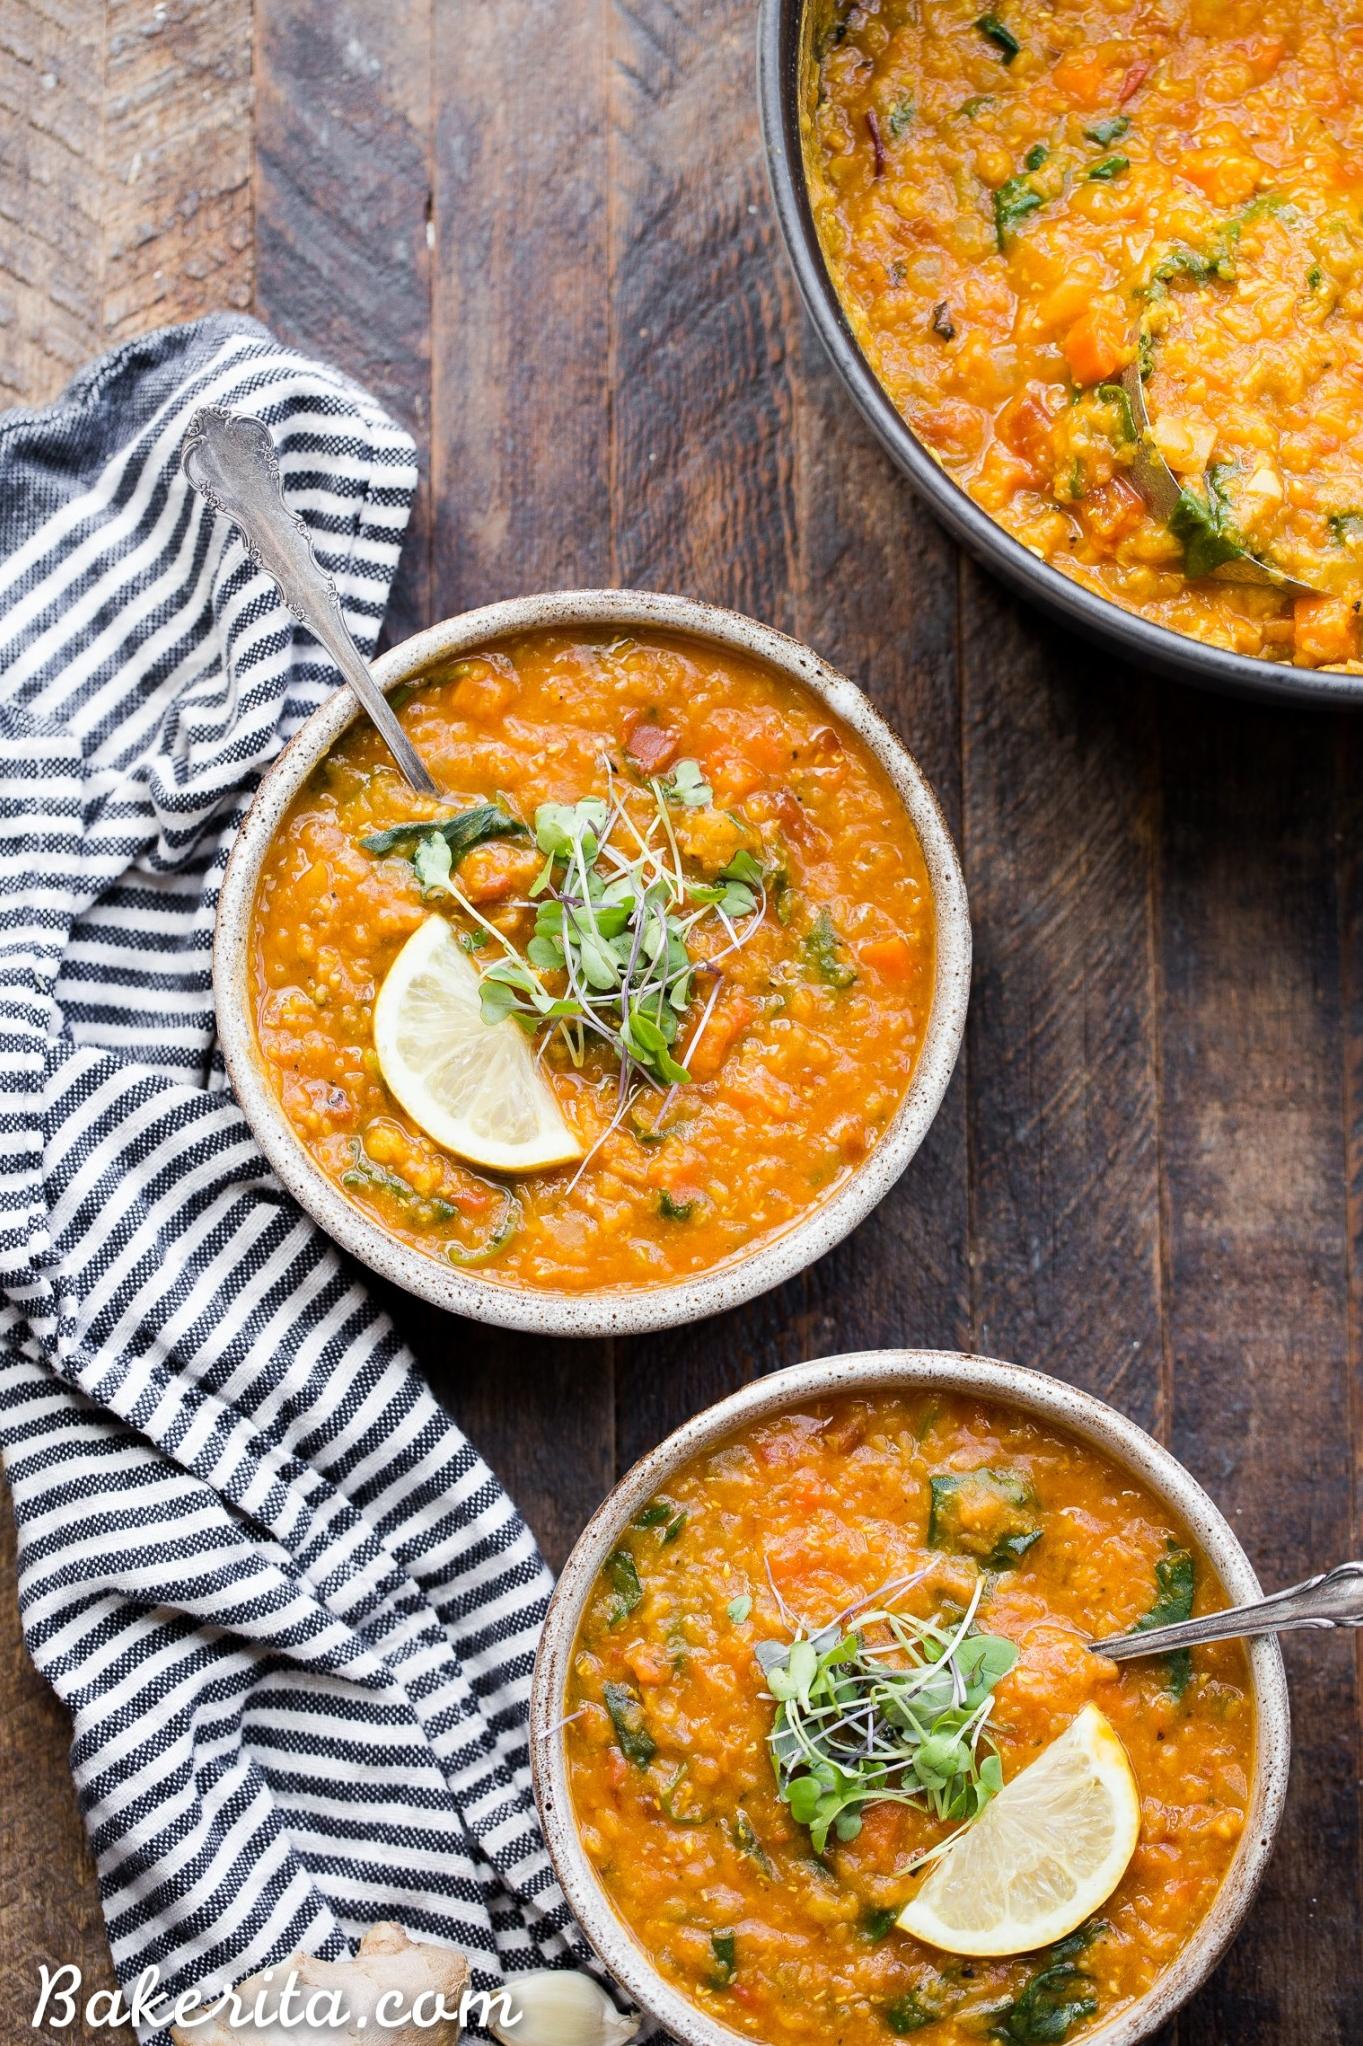 Hearty & Healthy: Red Lentil Soup Recipe